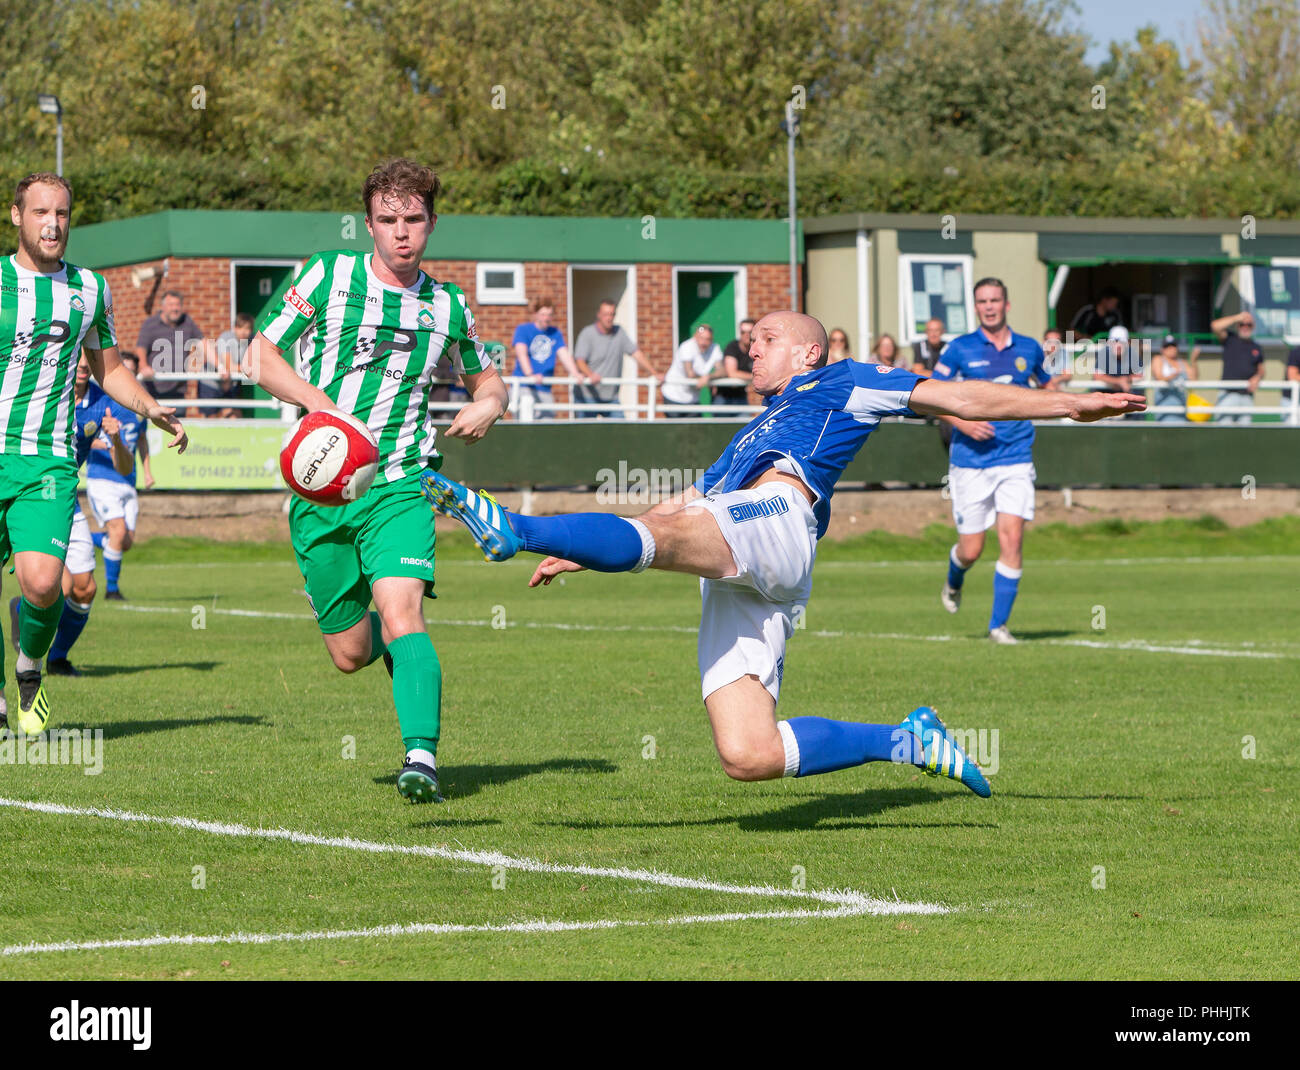 East Riding of Yorkshire, UK. 01 September 2018 - North Ferriby United A.F.C in the East Riding of Yorkshire, England, known as The Villagers and playing in green, hosted a match against Warrington Town AFC, known as The Yellows and The Wire and playing in blue, Both clubs play in the Evo Stik Northern Premier League Premier Division, the seventh tier of English football. Credit: John Hopkins/Alamy Live News Stock Photo